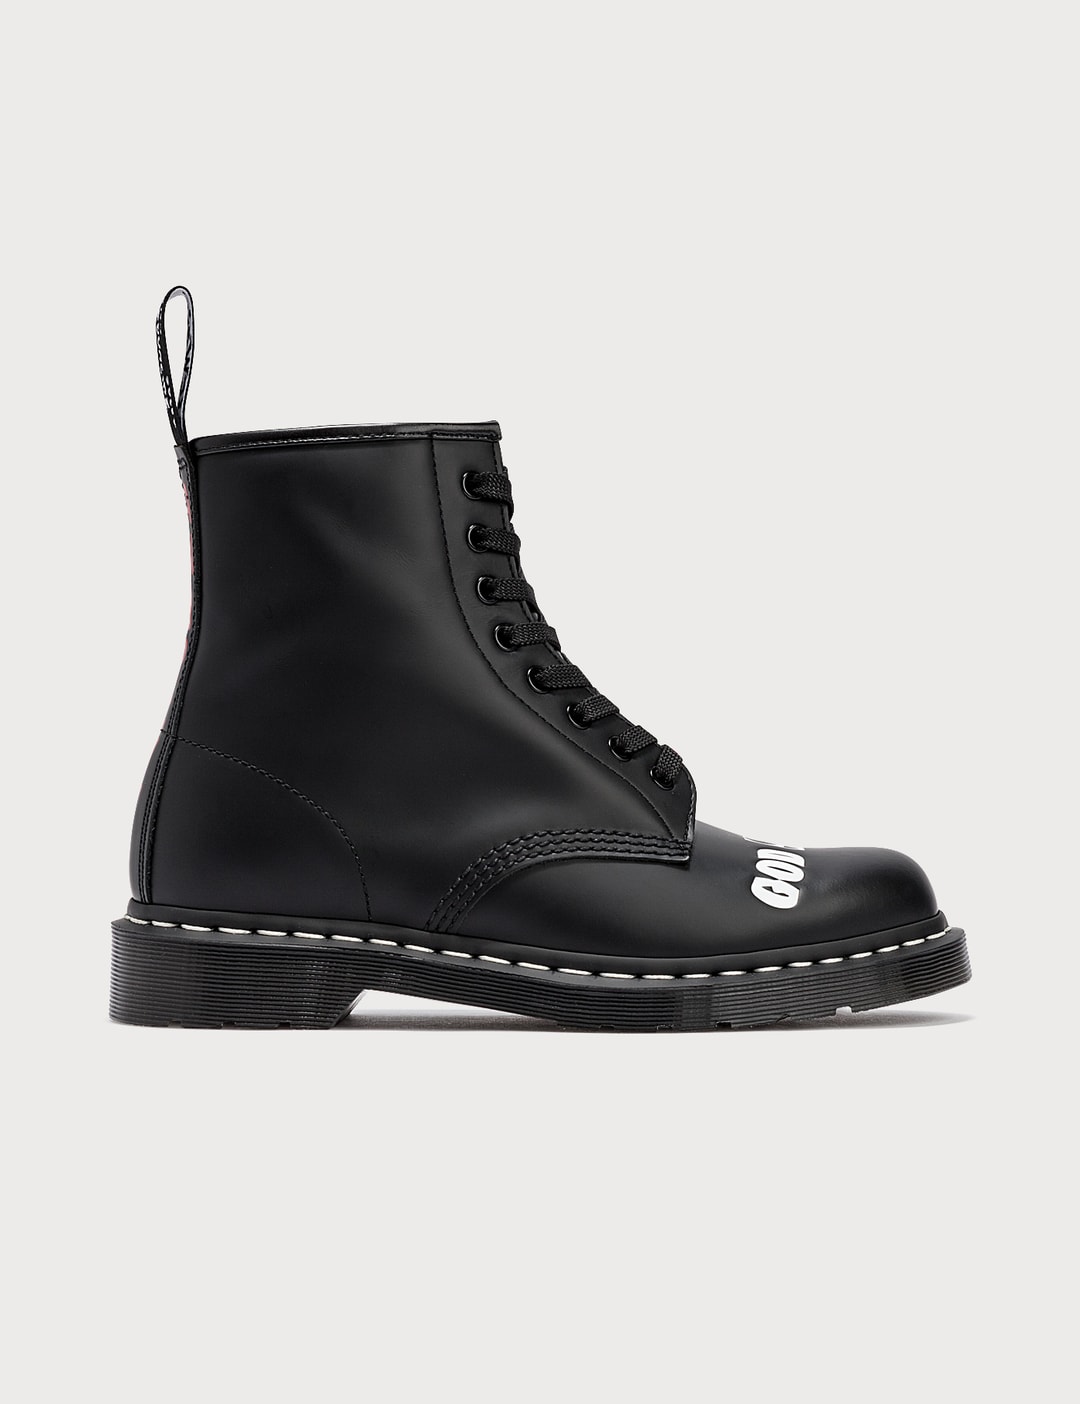 Dr. Martens - 1460 Pistols Boots | HBX - Curated Fashion and Lifestyle by Hypebeast